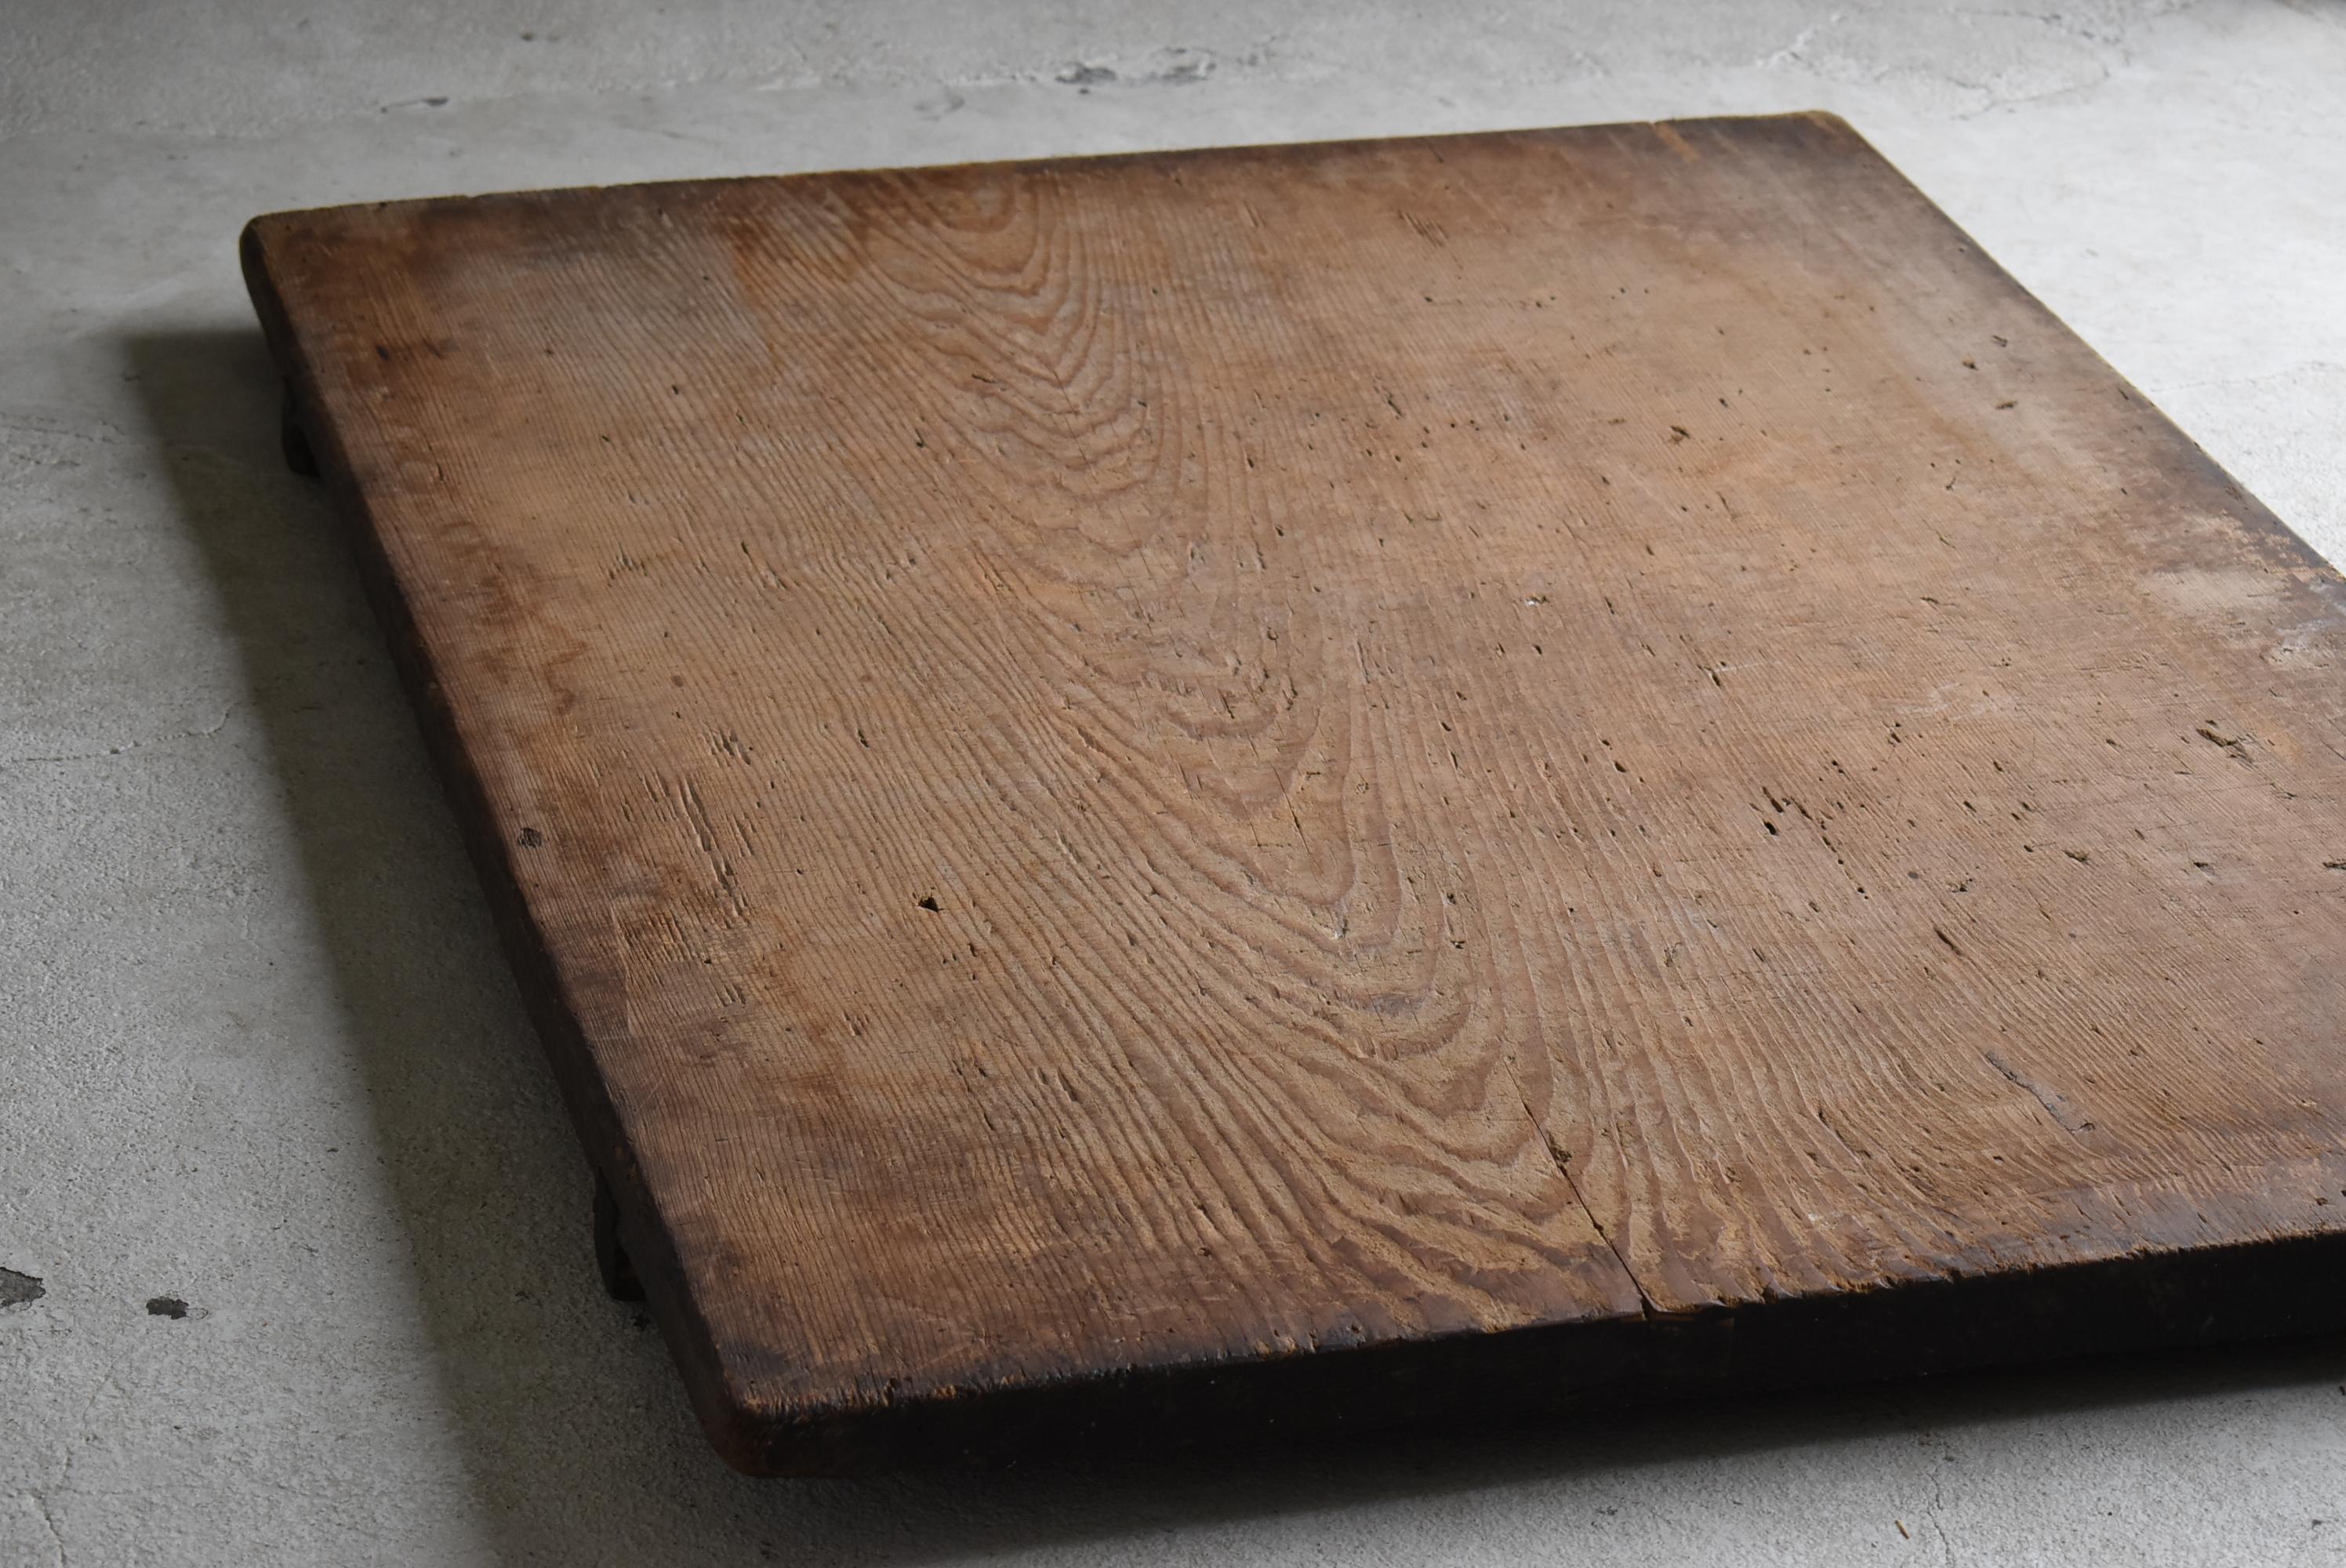 Meiji Japanese Antique Extra-Large Wooden board 1860s-1900s / Wabi Sabi Abstract Art